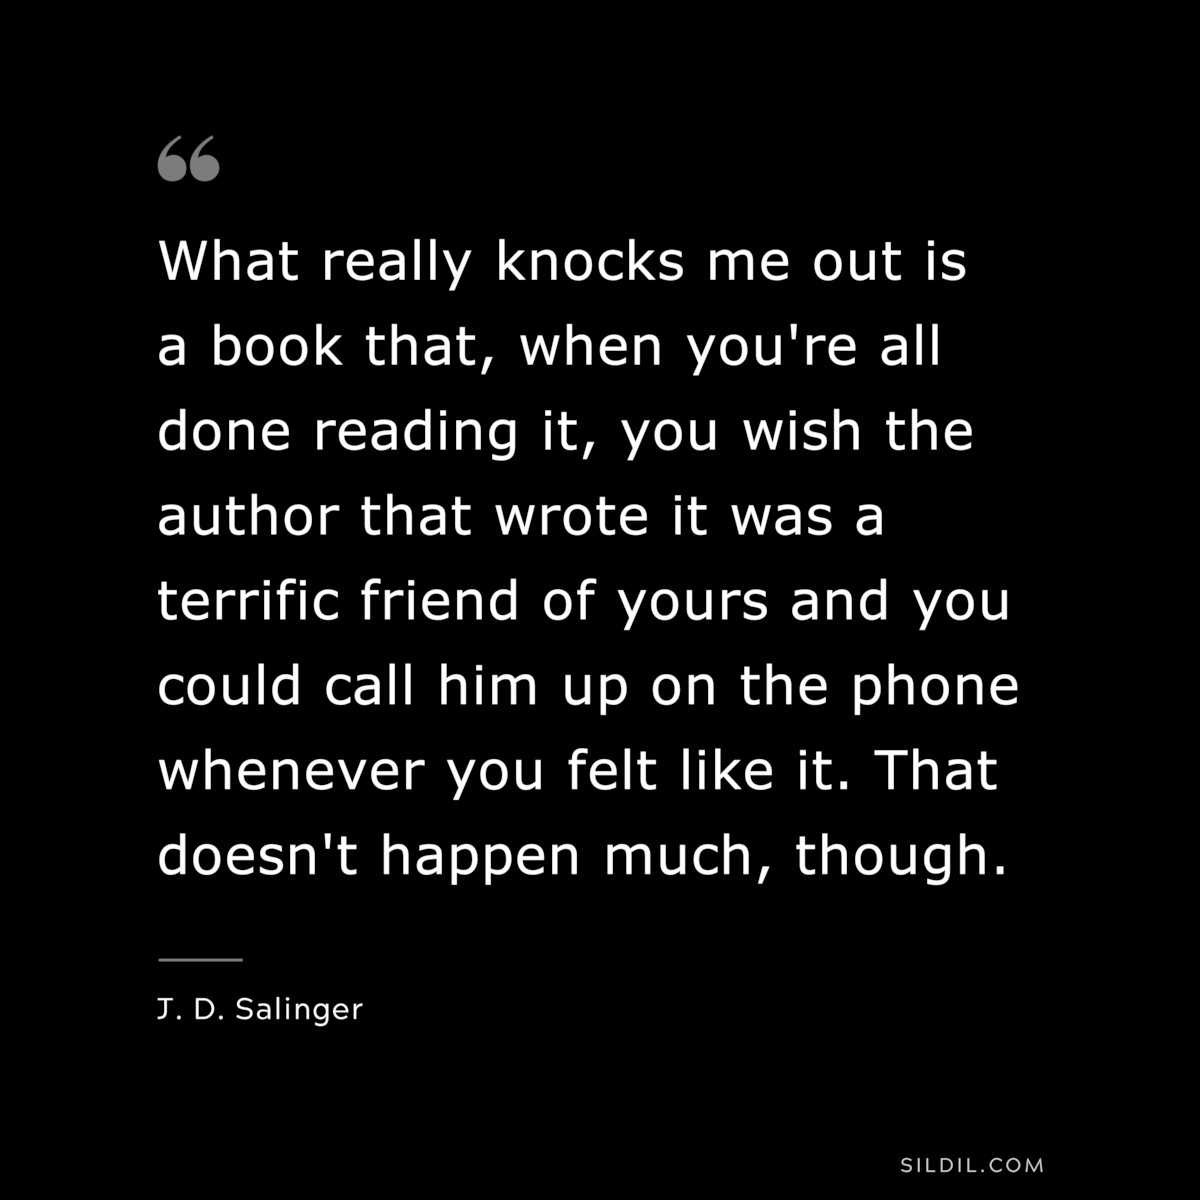 What really knocks me out is a book that, when you're all done reading it, you wish the author that wrote it was a terrific friend of yours and you could call him up on the phone whenever you felt like it. That doesn't happen much, though. — J. D. Salinger